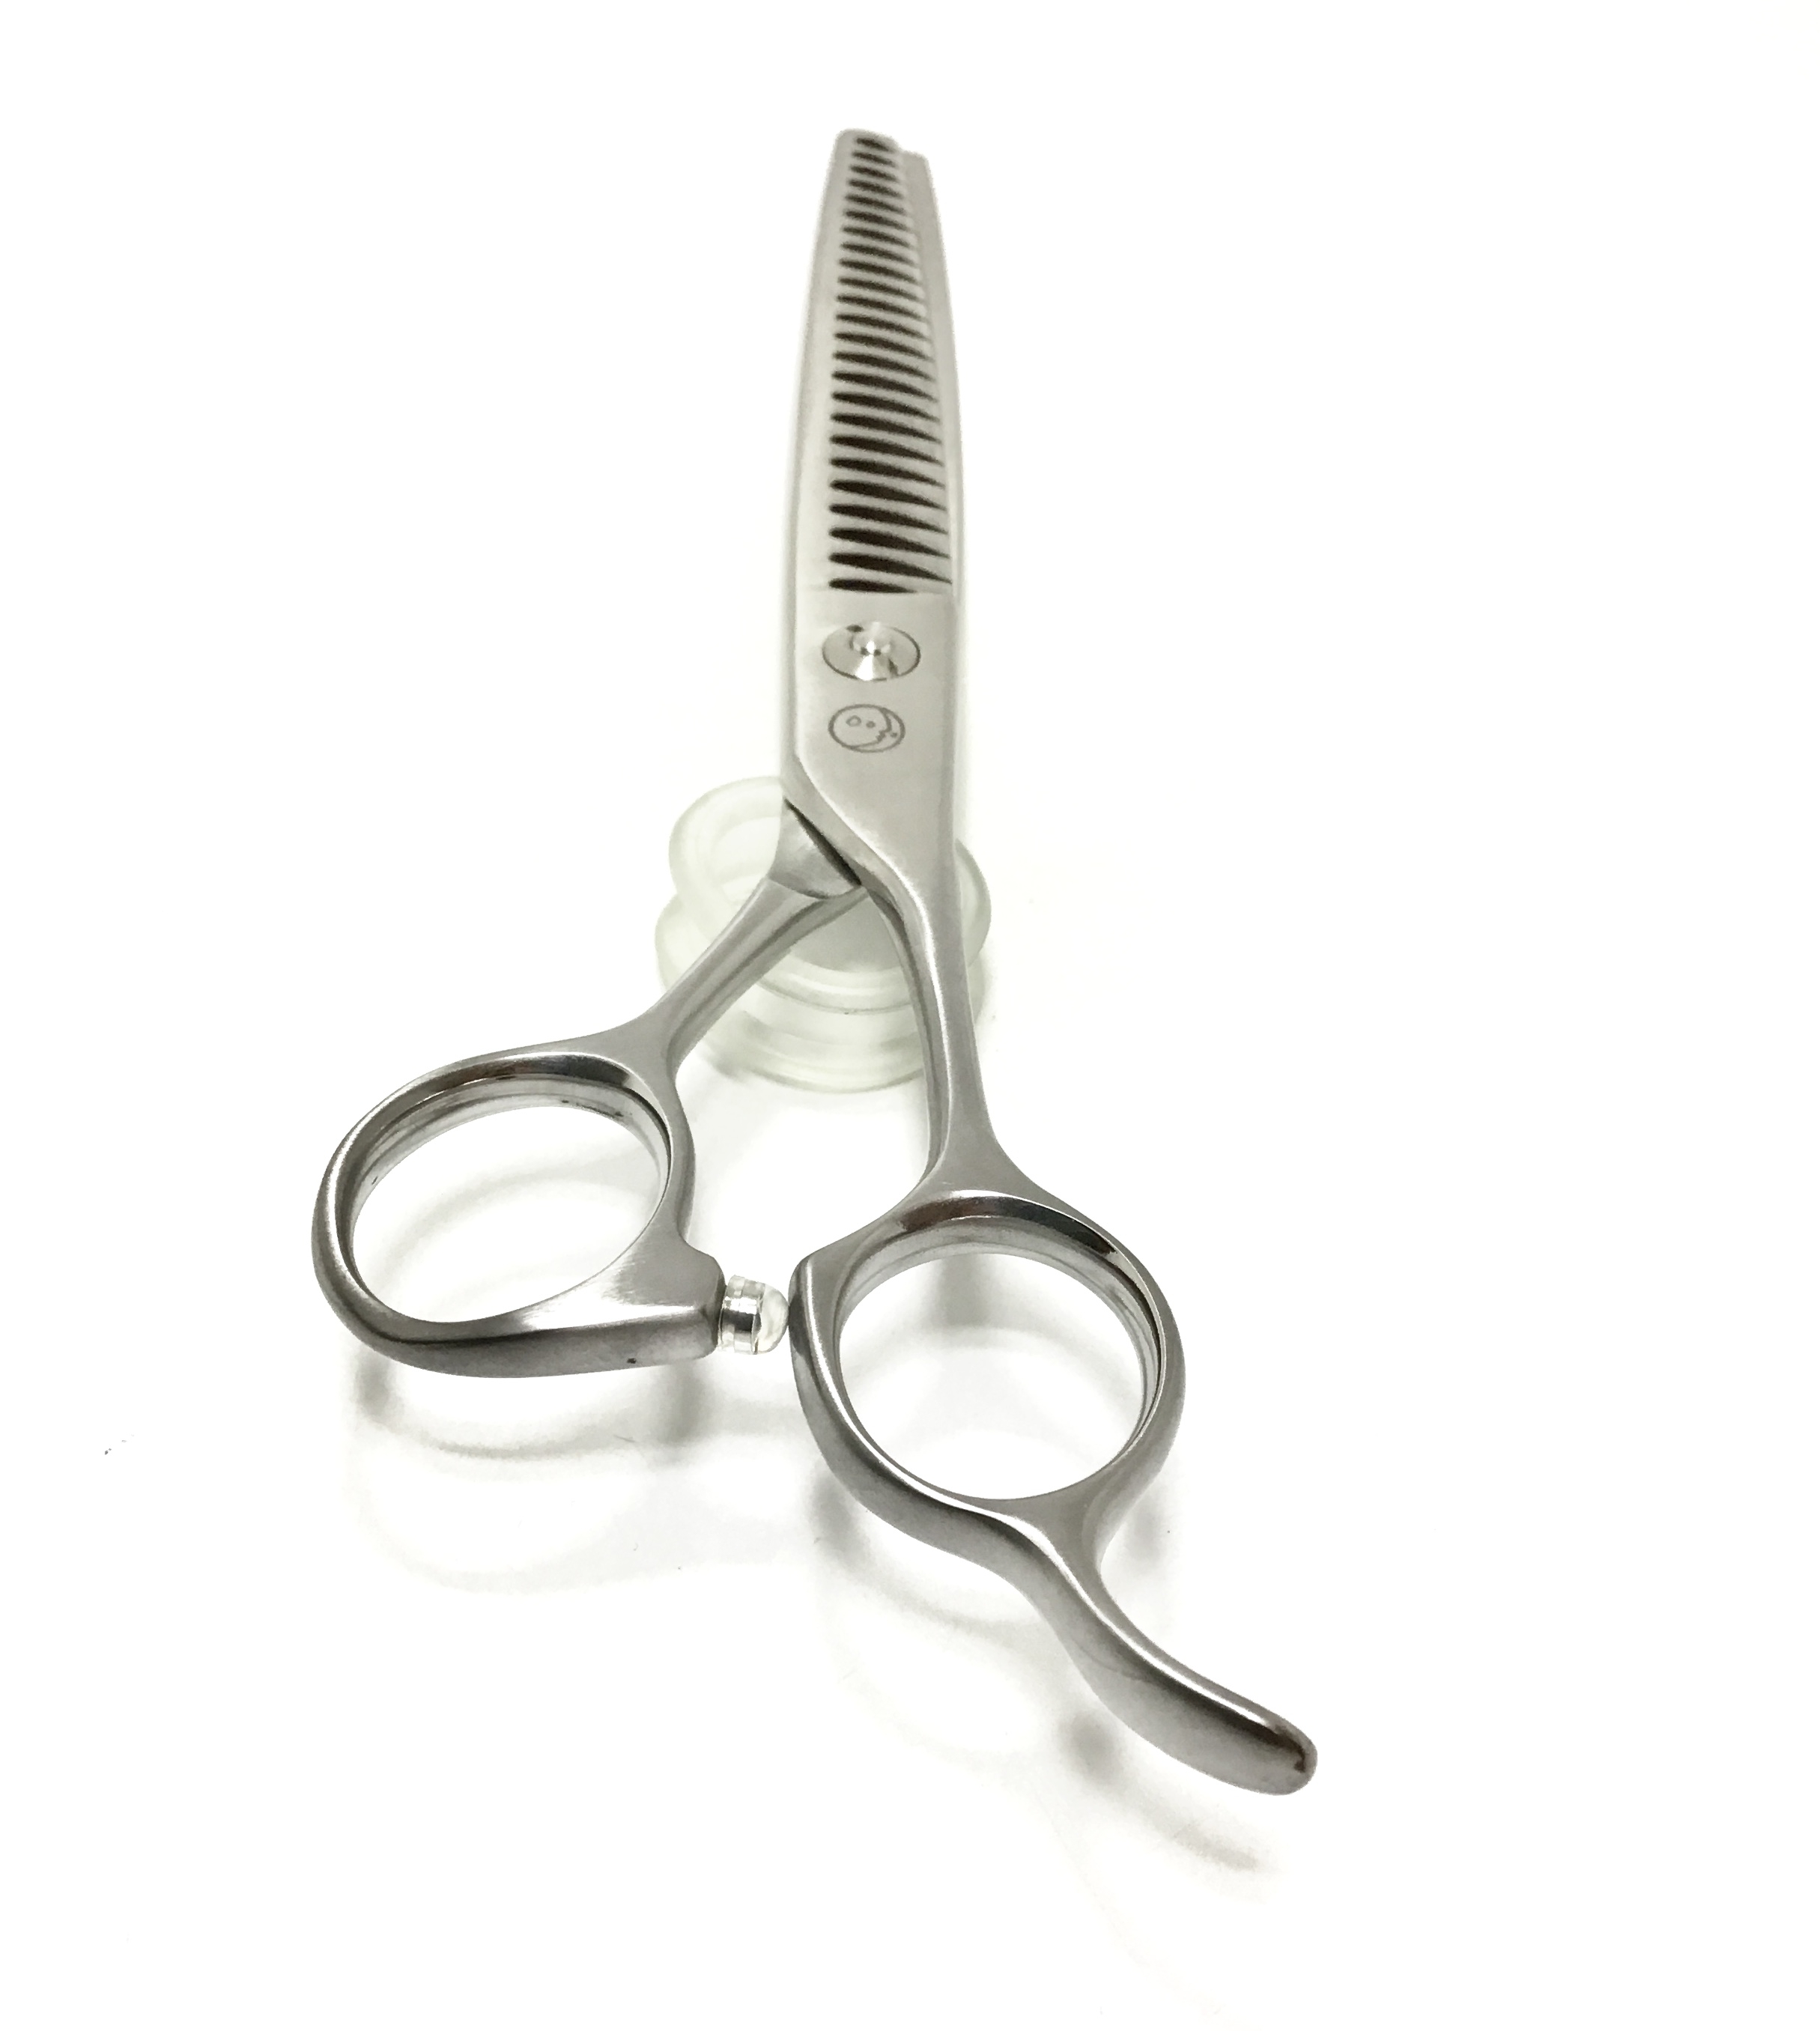 The new Renomed Super Stinger scissors have ultra-thin and super-sharp  blades like no other on the market. An exquisite tool for those fly…